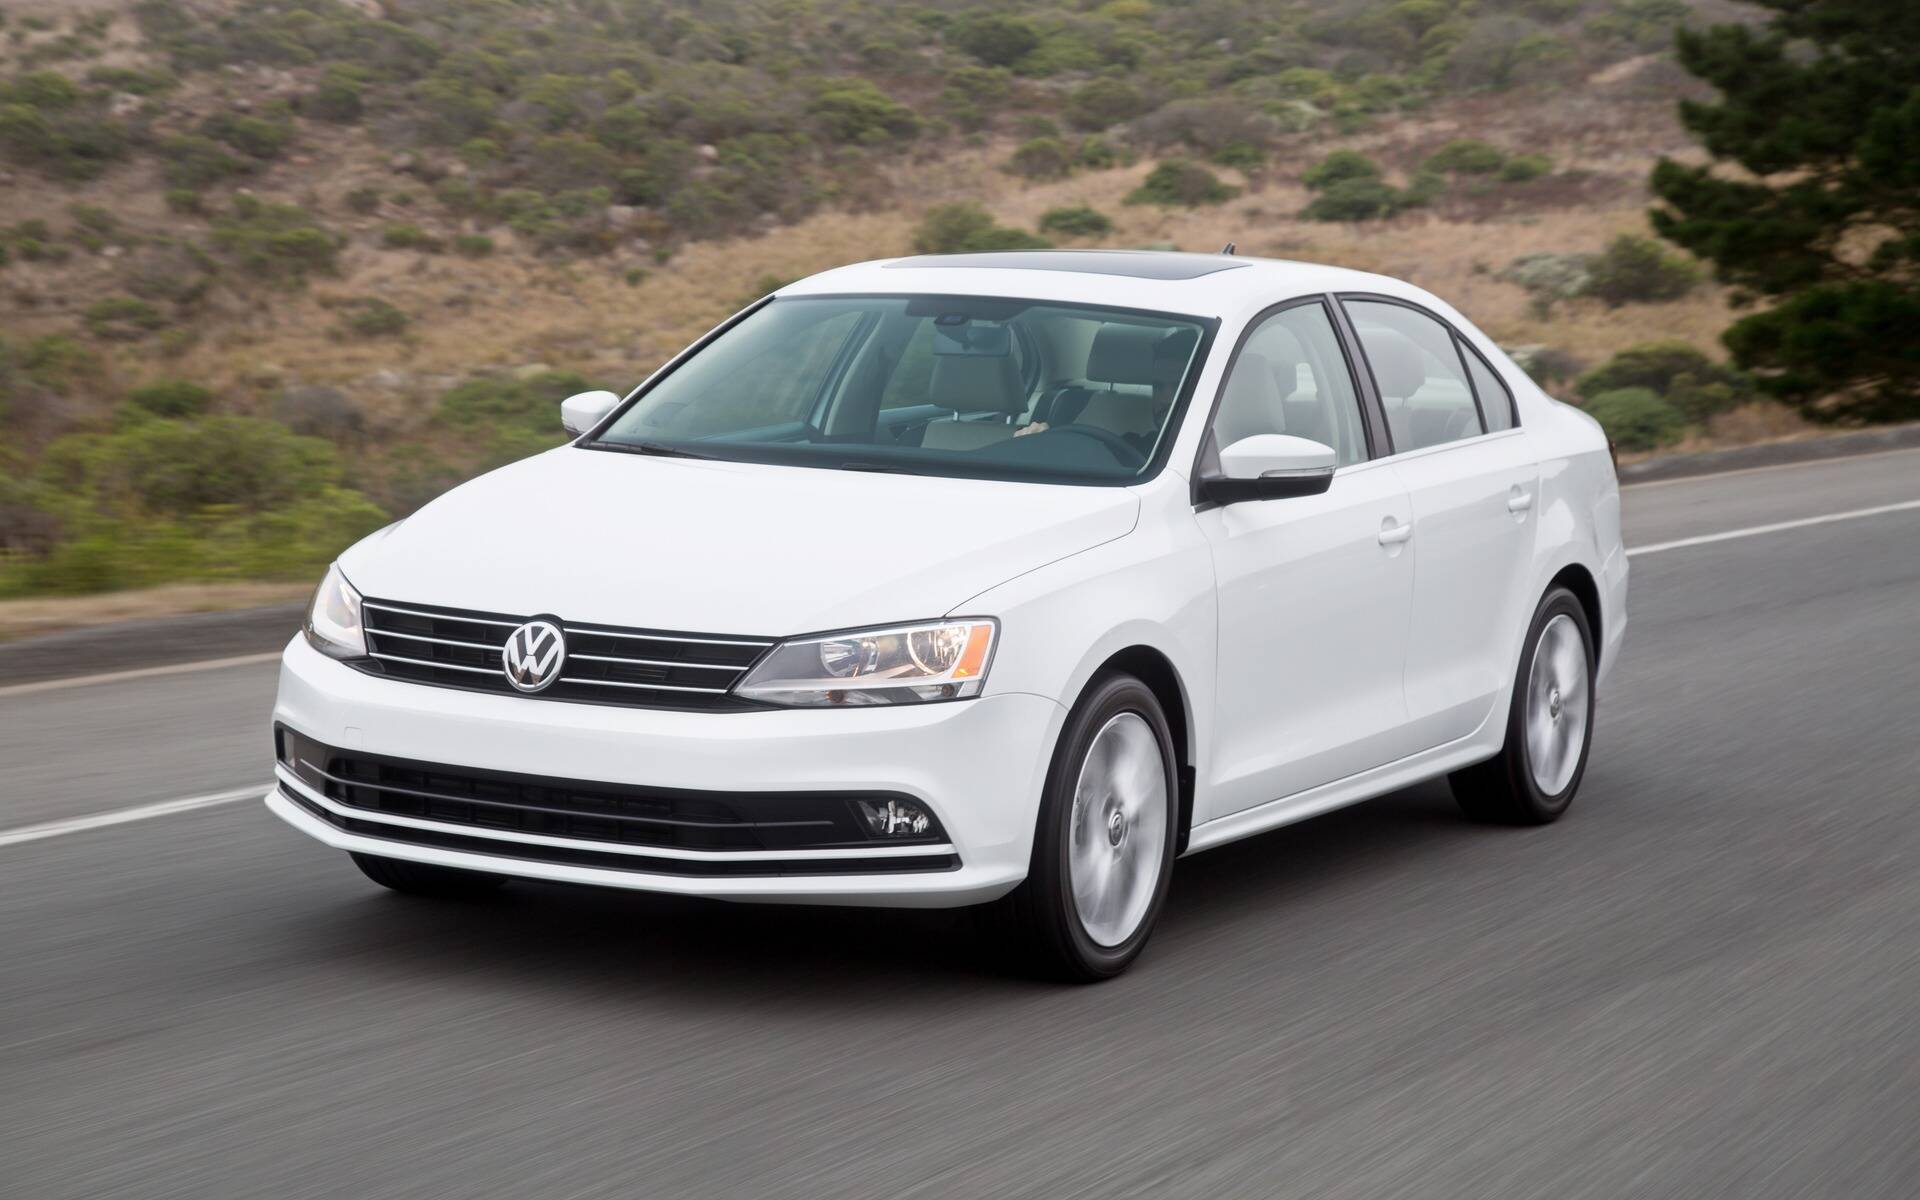 Over 33,000 VW Jettas Recalled in Canada for Possible Fuel Leak The